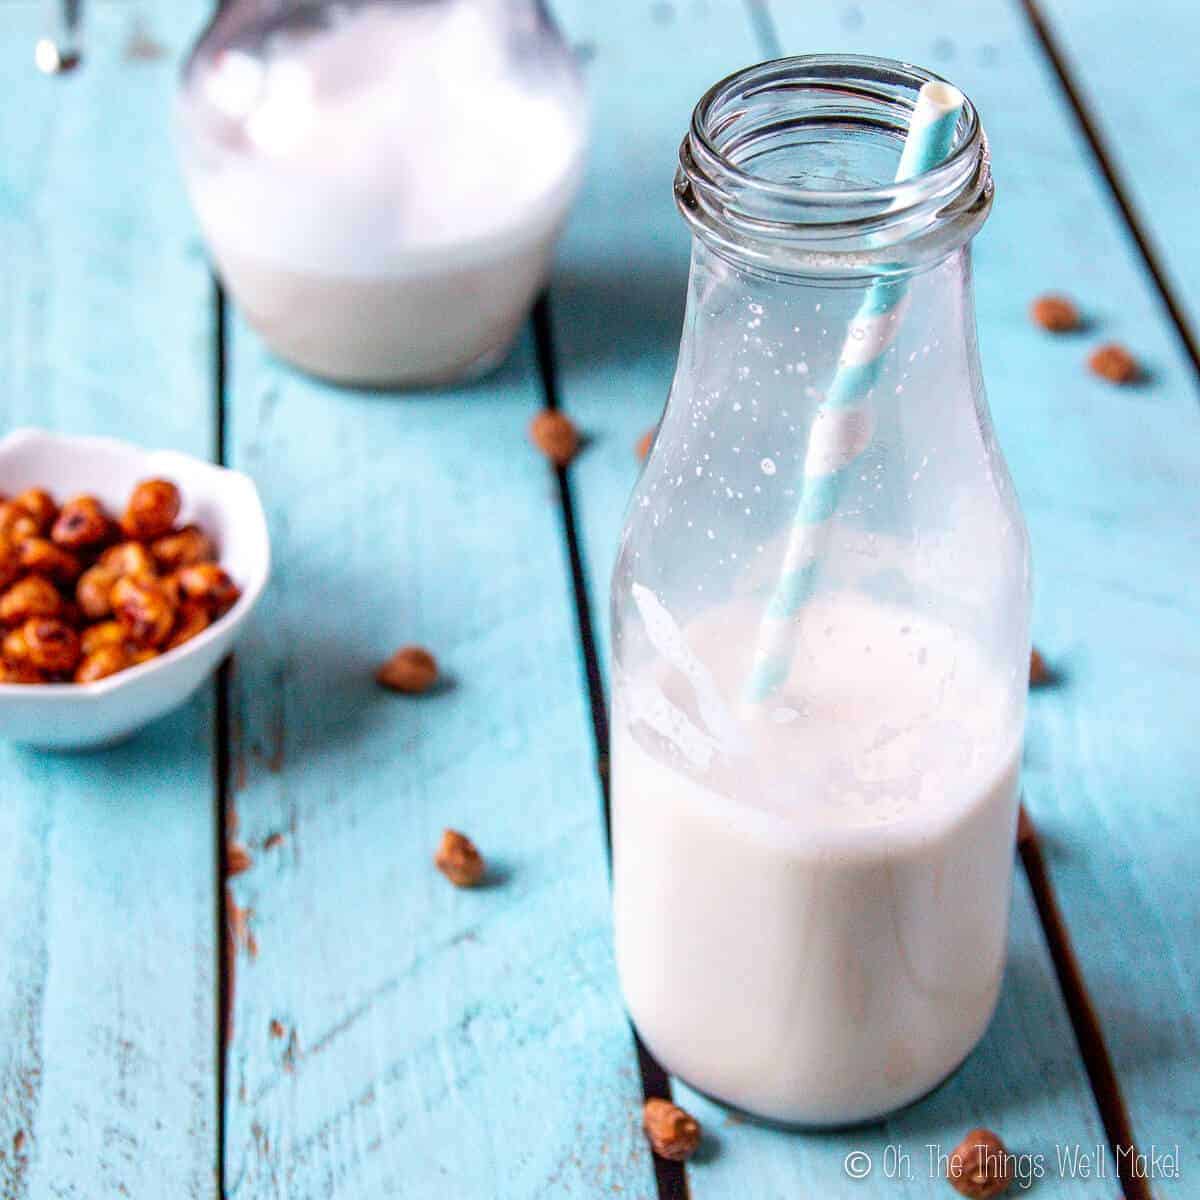 A bottle of tigernut milk (horchata de chufa) in front of a pitcher filled with more tiger nut milk, both surrounded by tiger nuts.